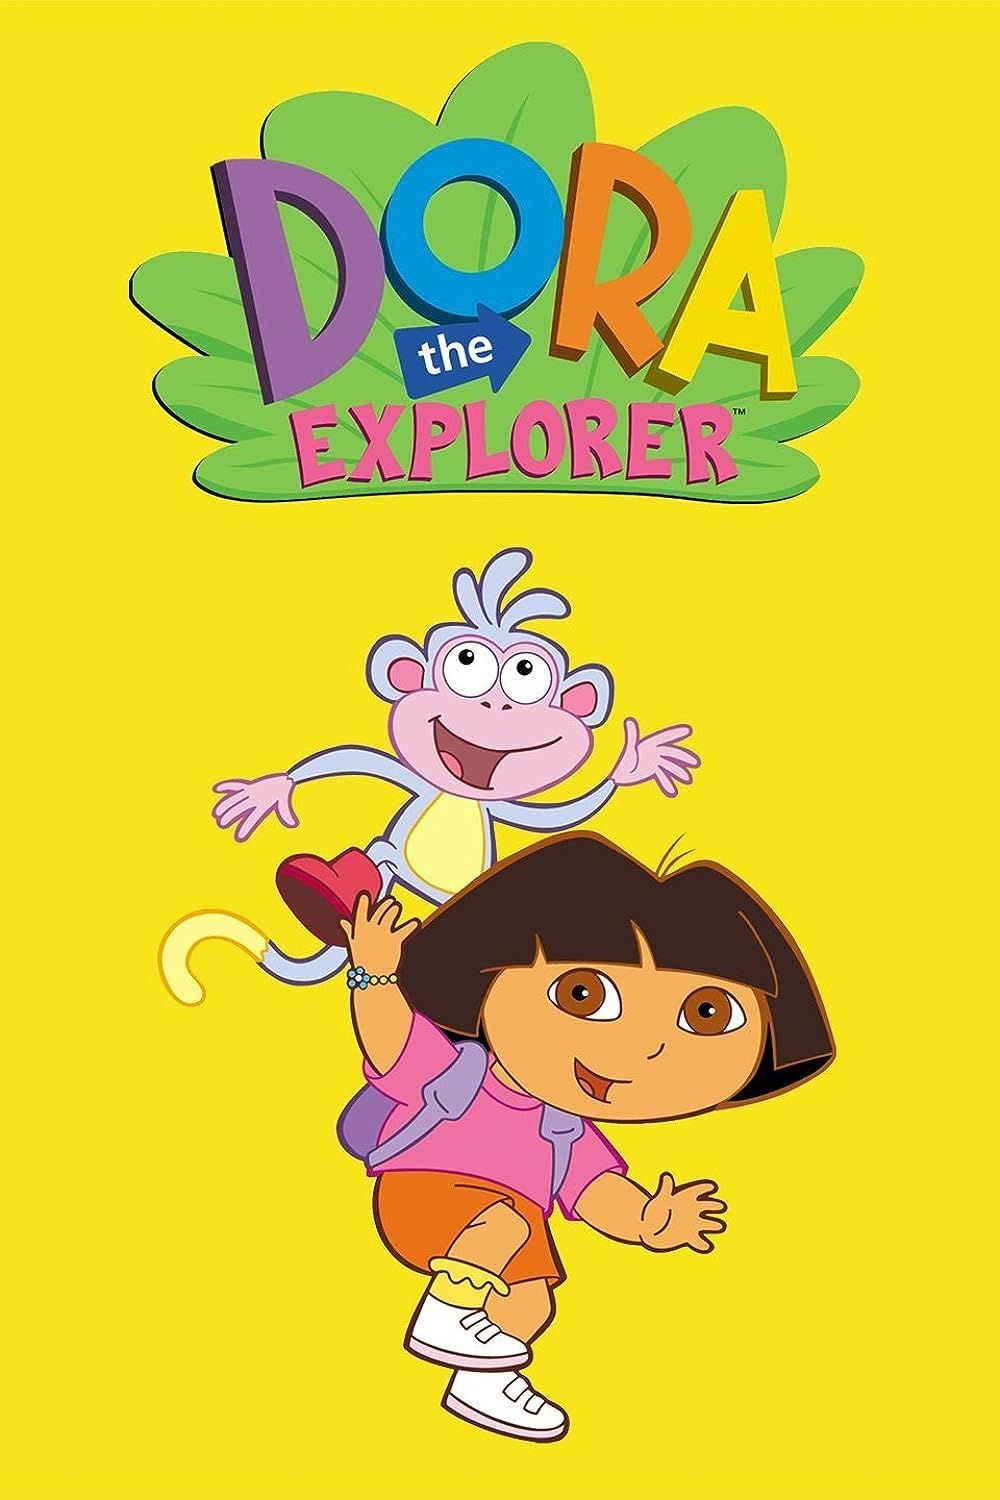 Nickelodeon Orders 'Dora the Explorer' Spinoff, Partners with